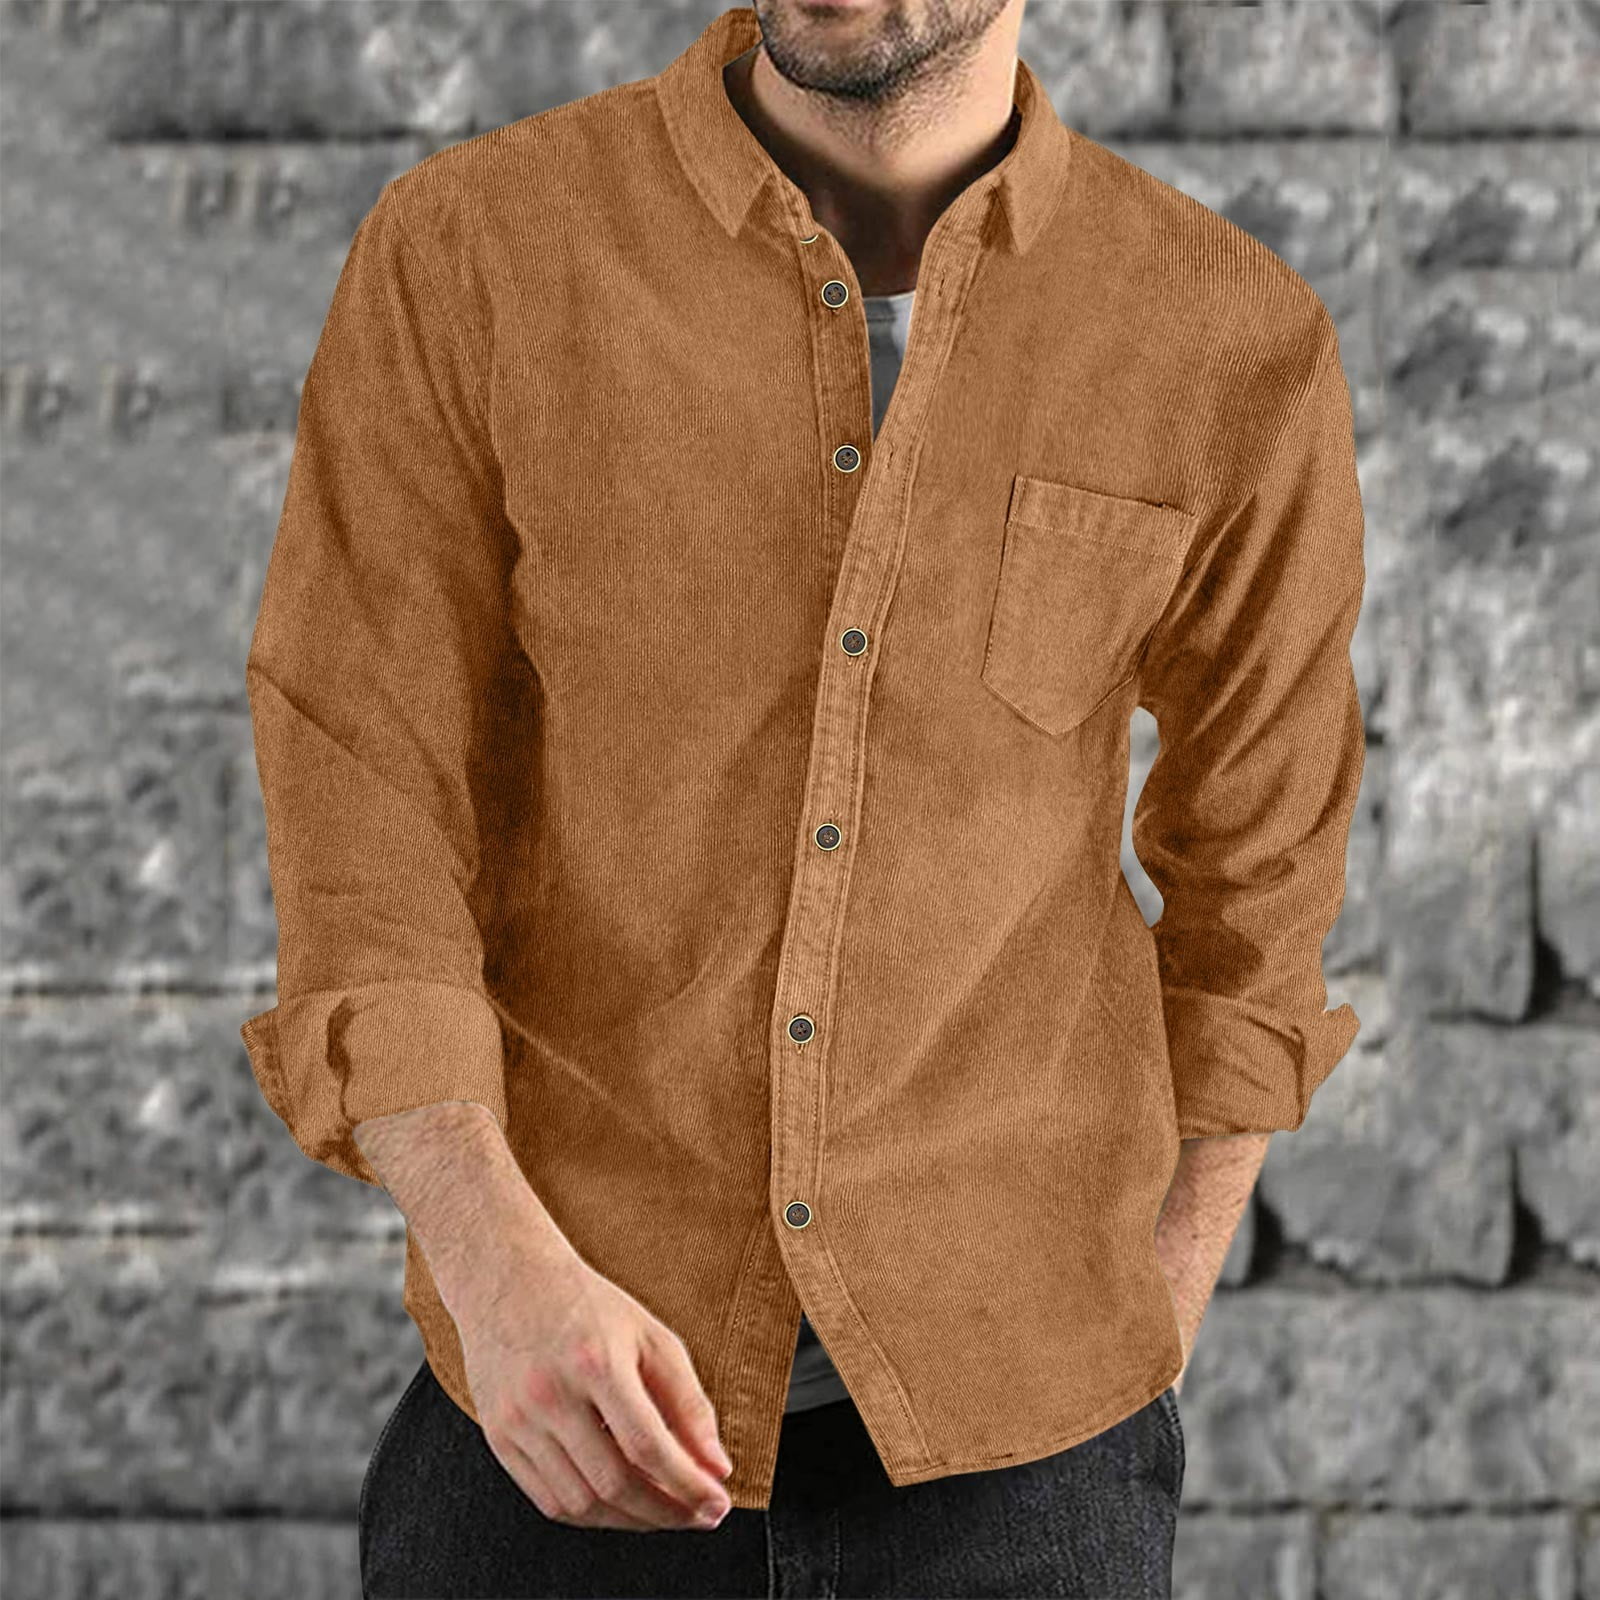 brown corduroy outfit  Brown outfit, Classy casual outfits